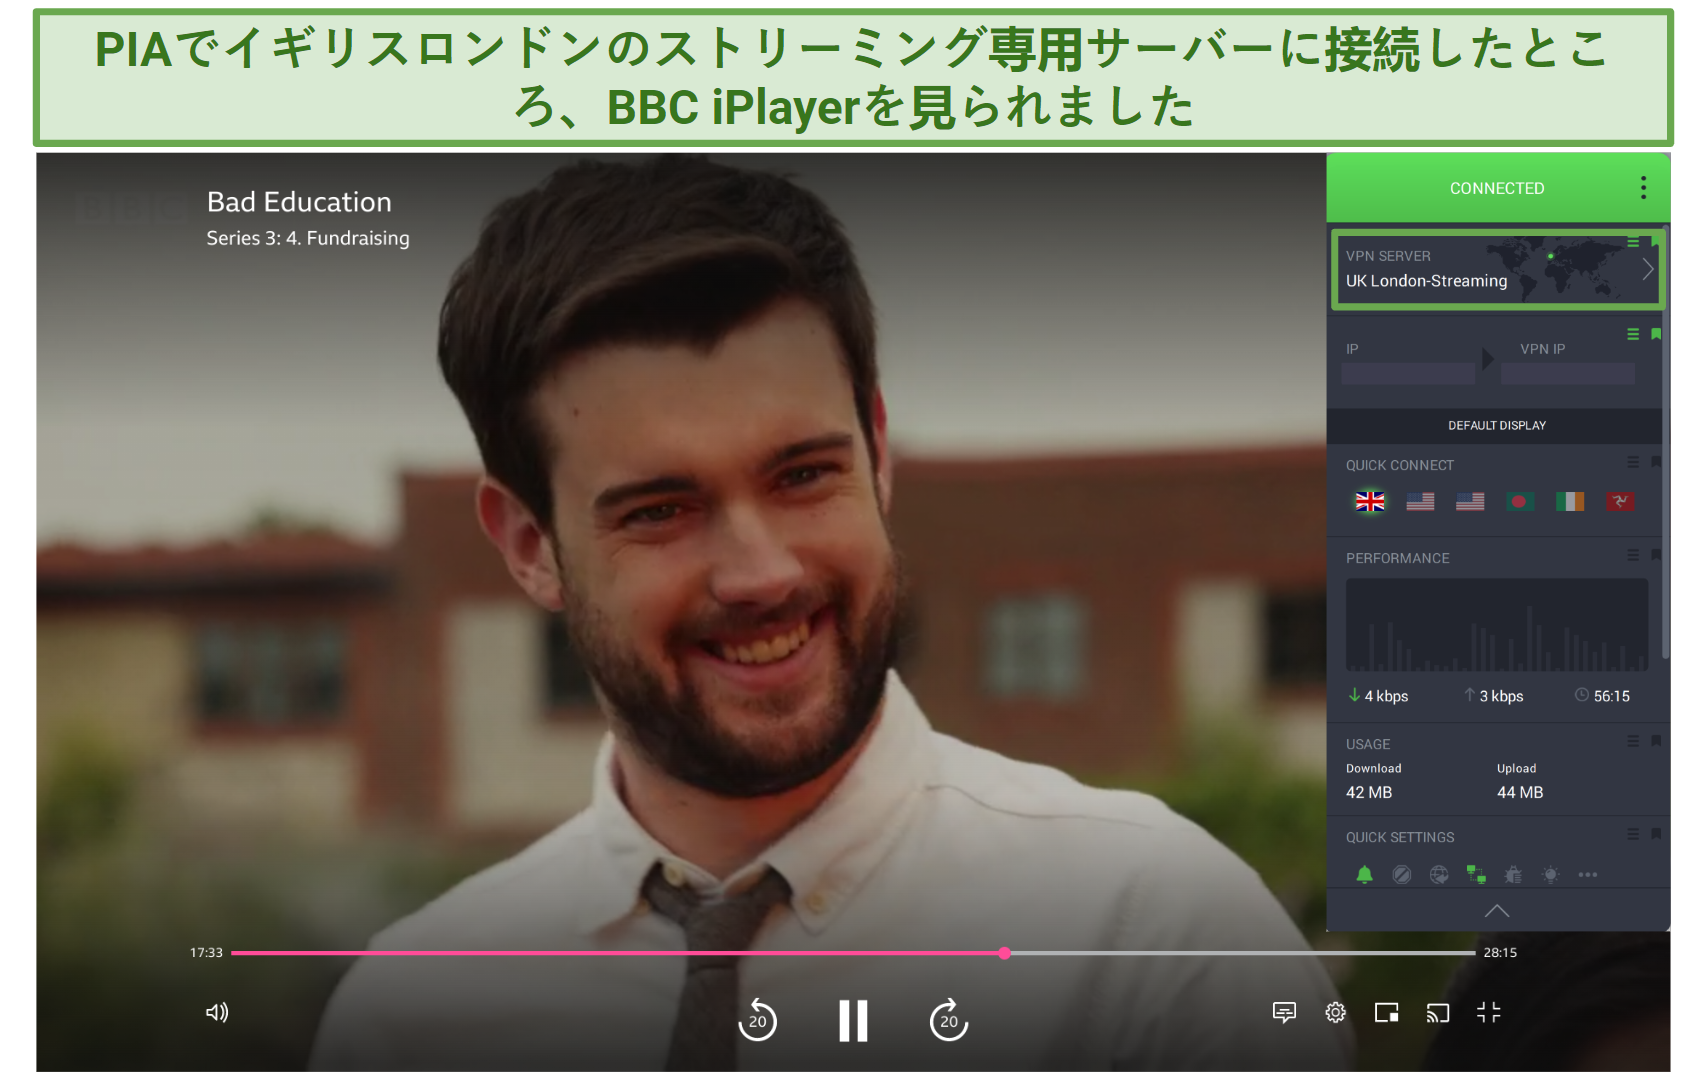 Screenshot of BBC iPlayer streaming Bad Education while connected to PIA